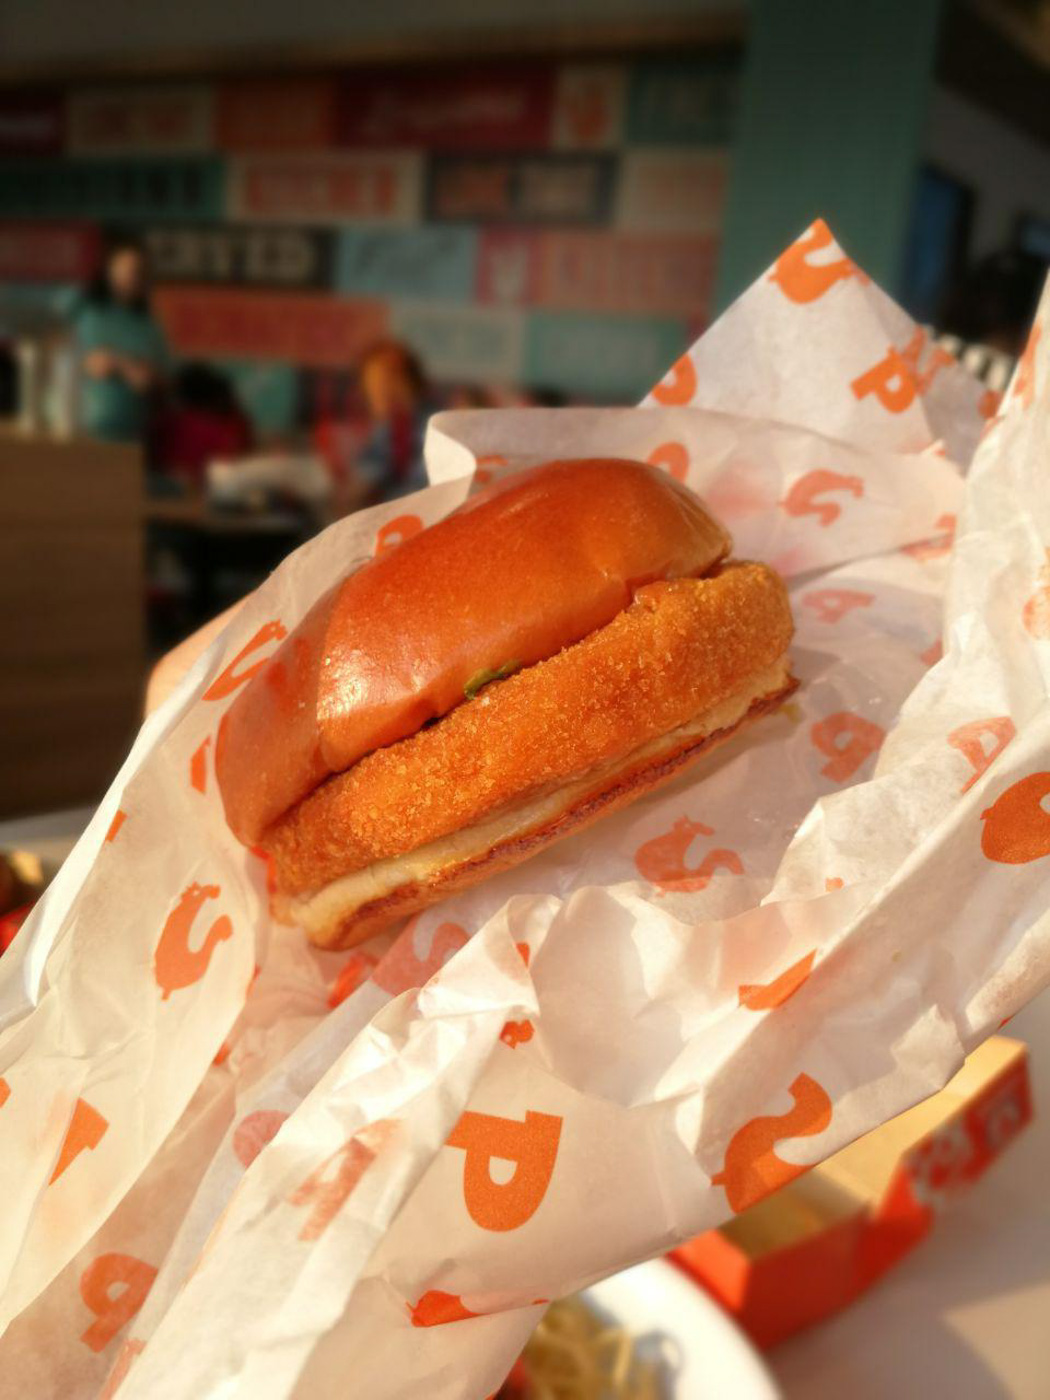 First impressions, photos: Popeyes is now in Metro Manila, and we're